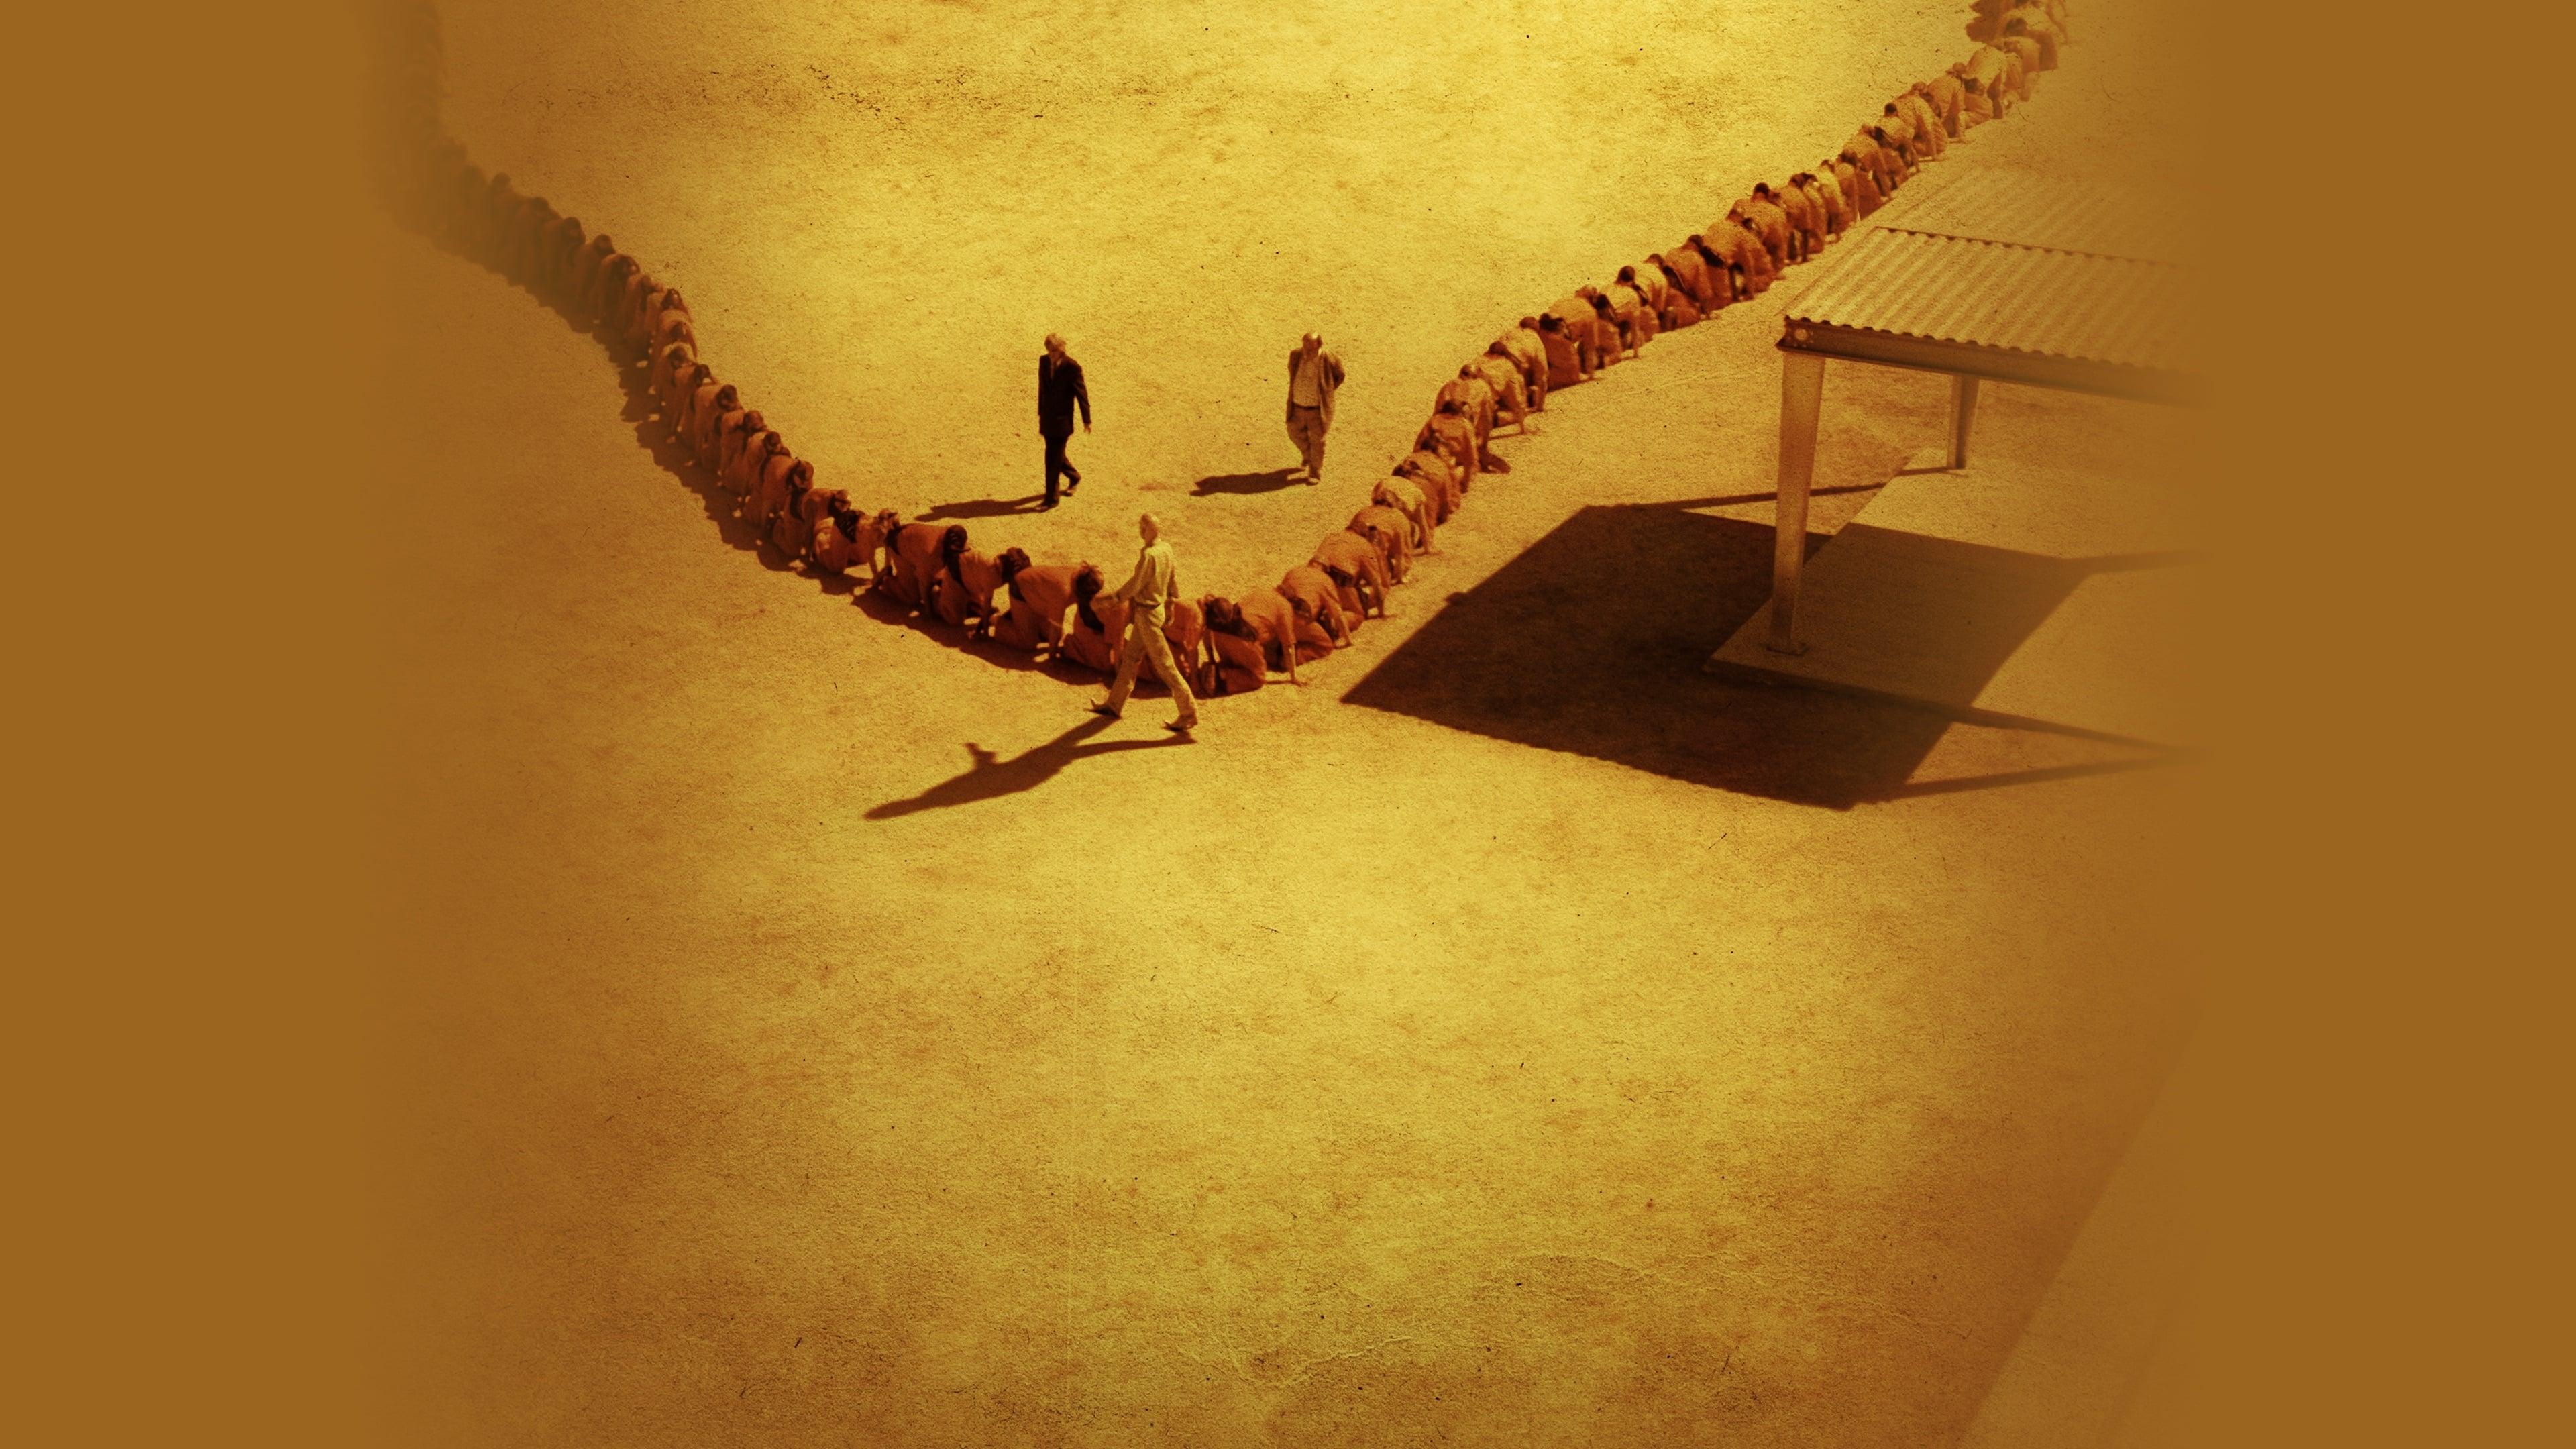 The Human Centipede 3 (Final Sequence) backdrop